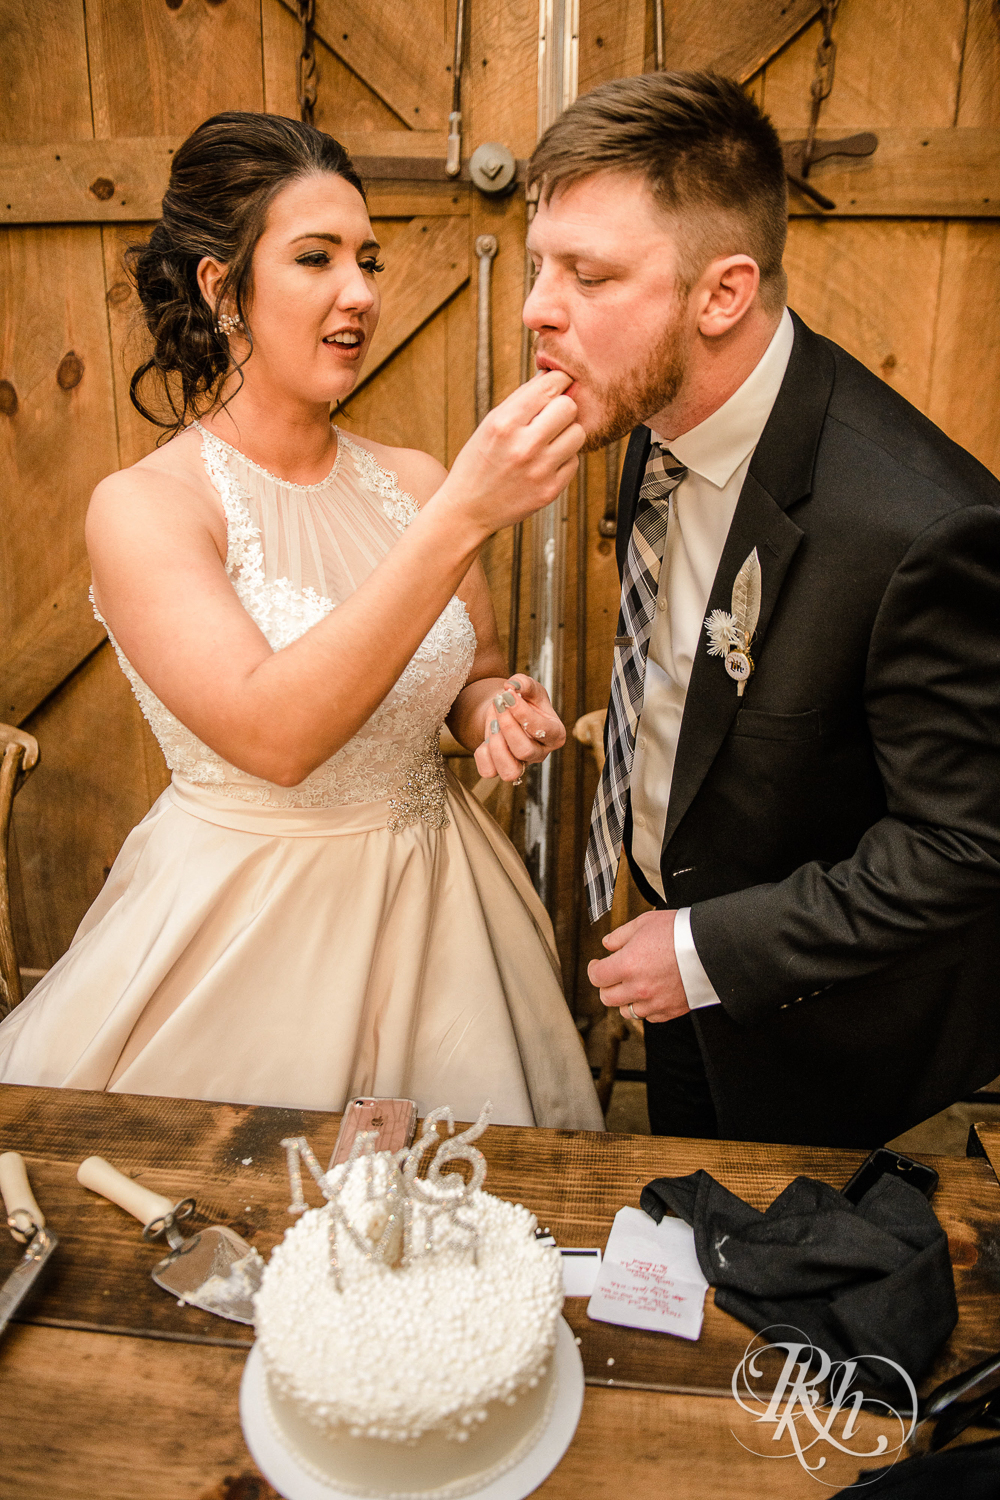 Bride and groom cut wedding cake during reception at Creekside Farm in Rush City, Minnesota.